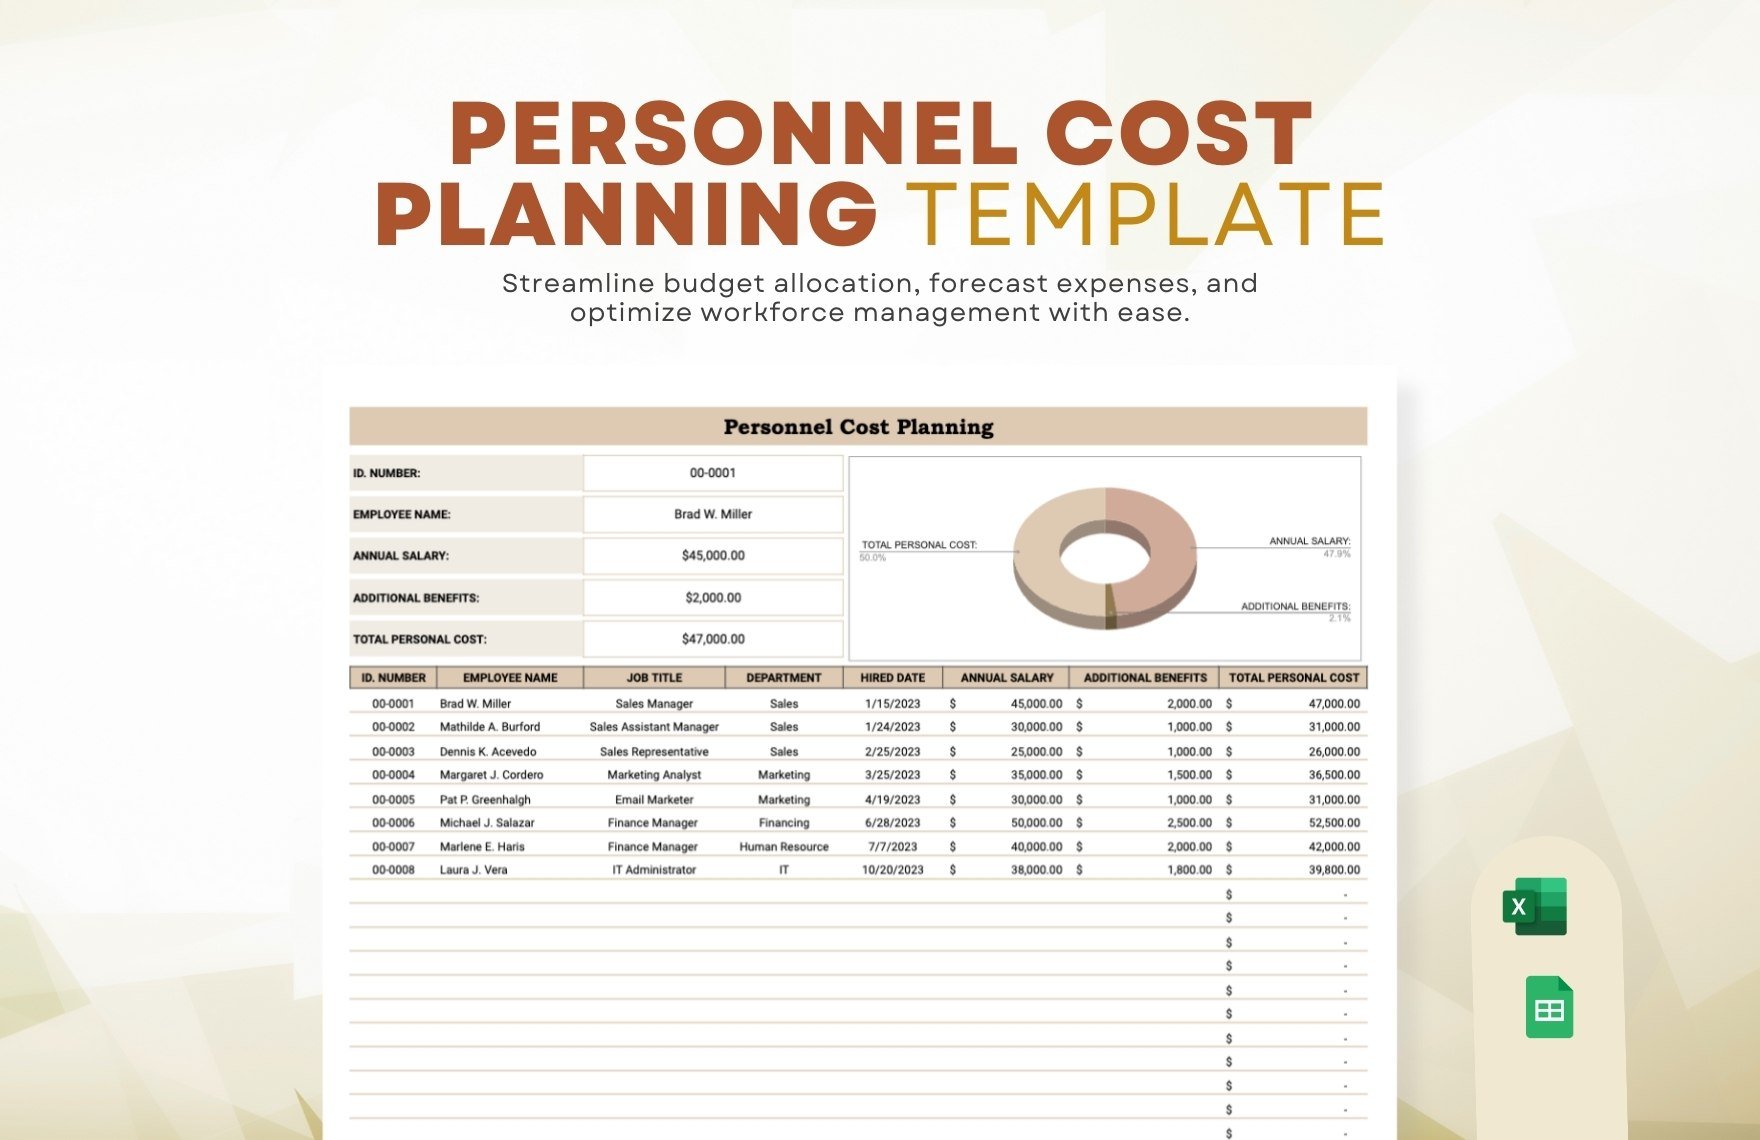 Personnel Cost Planning Template in Excel, Google Sheets